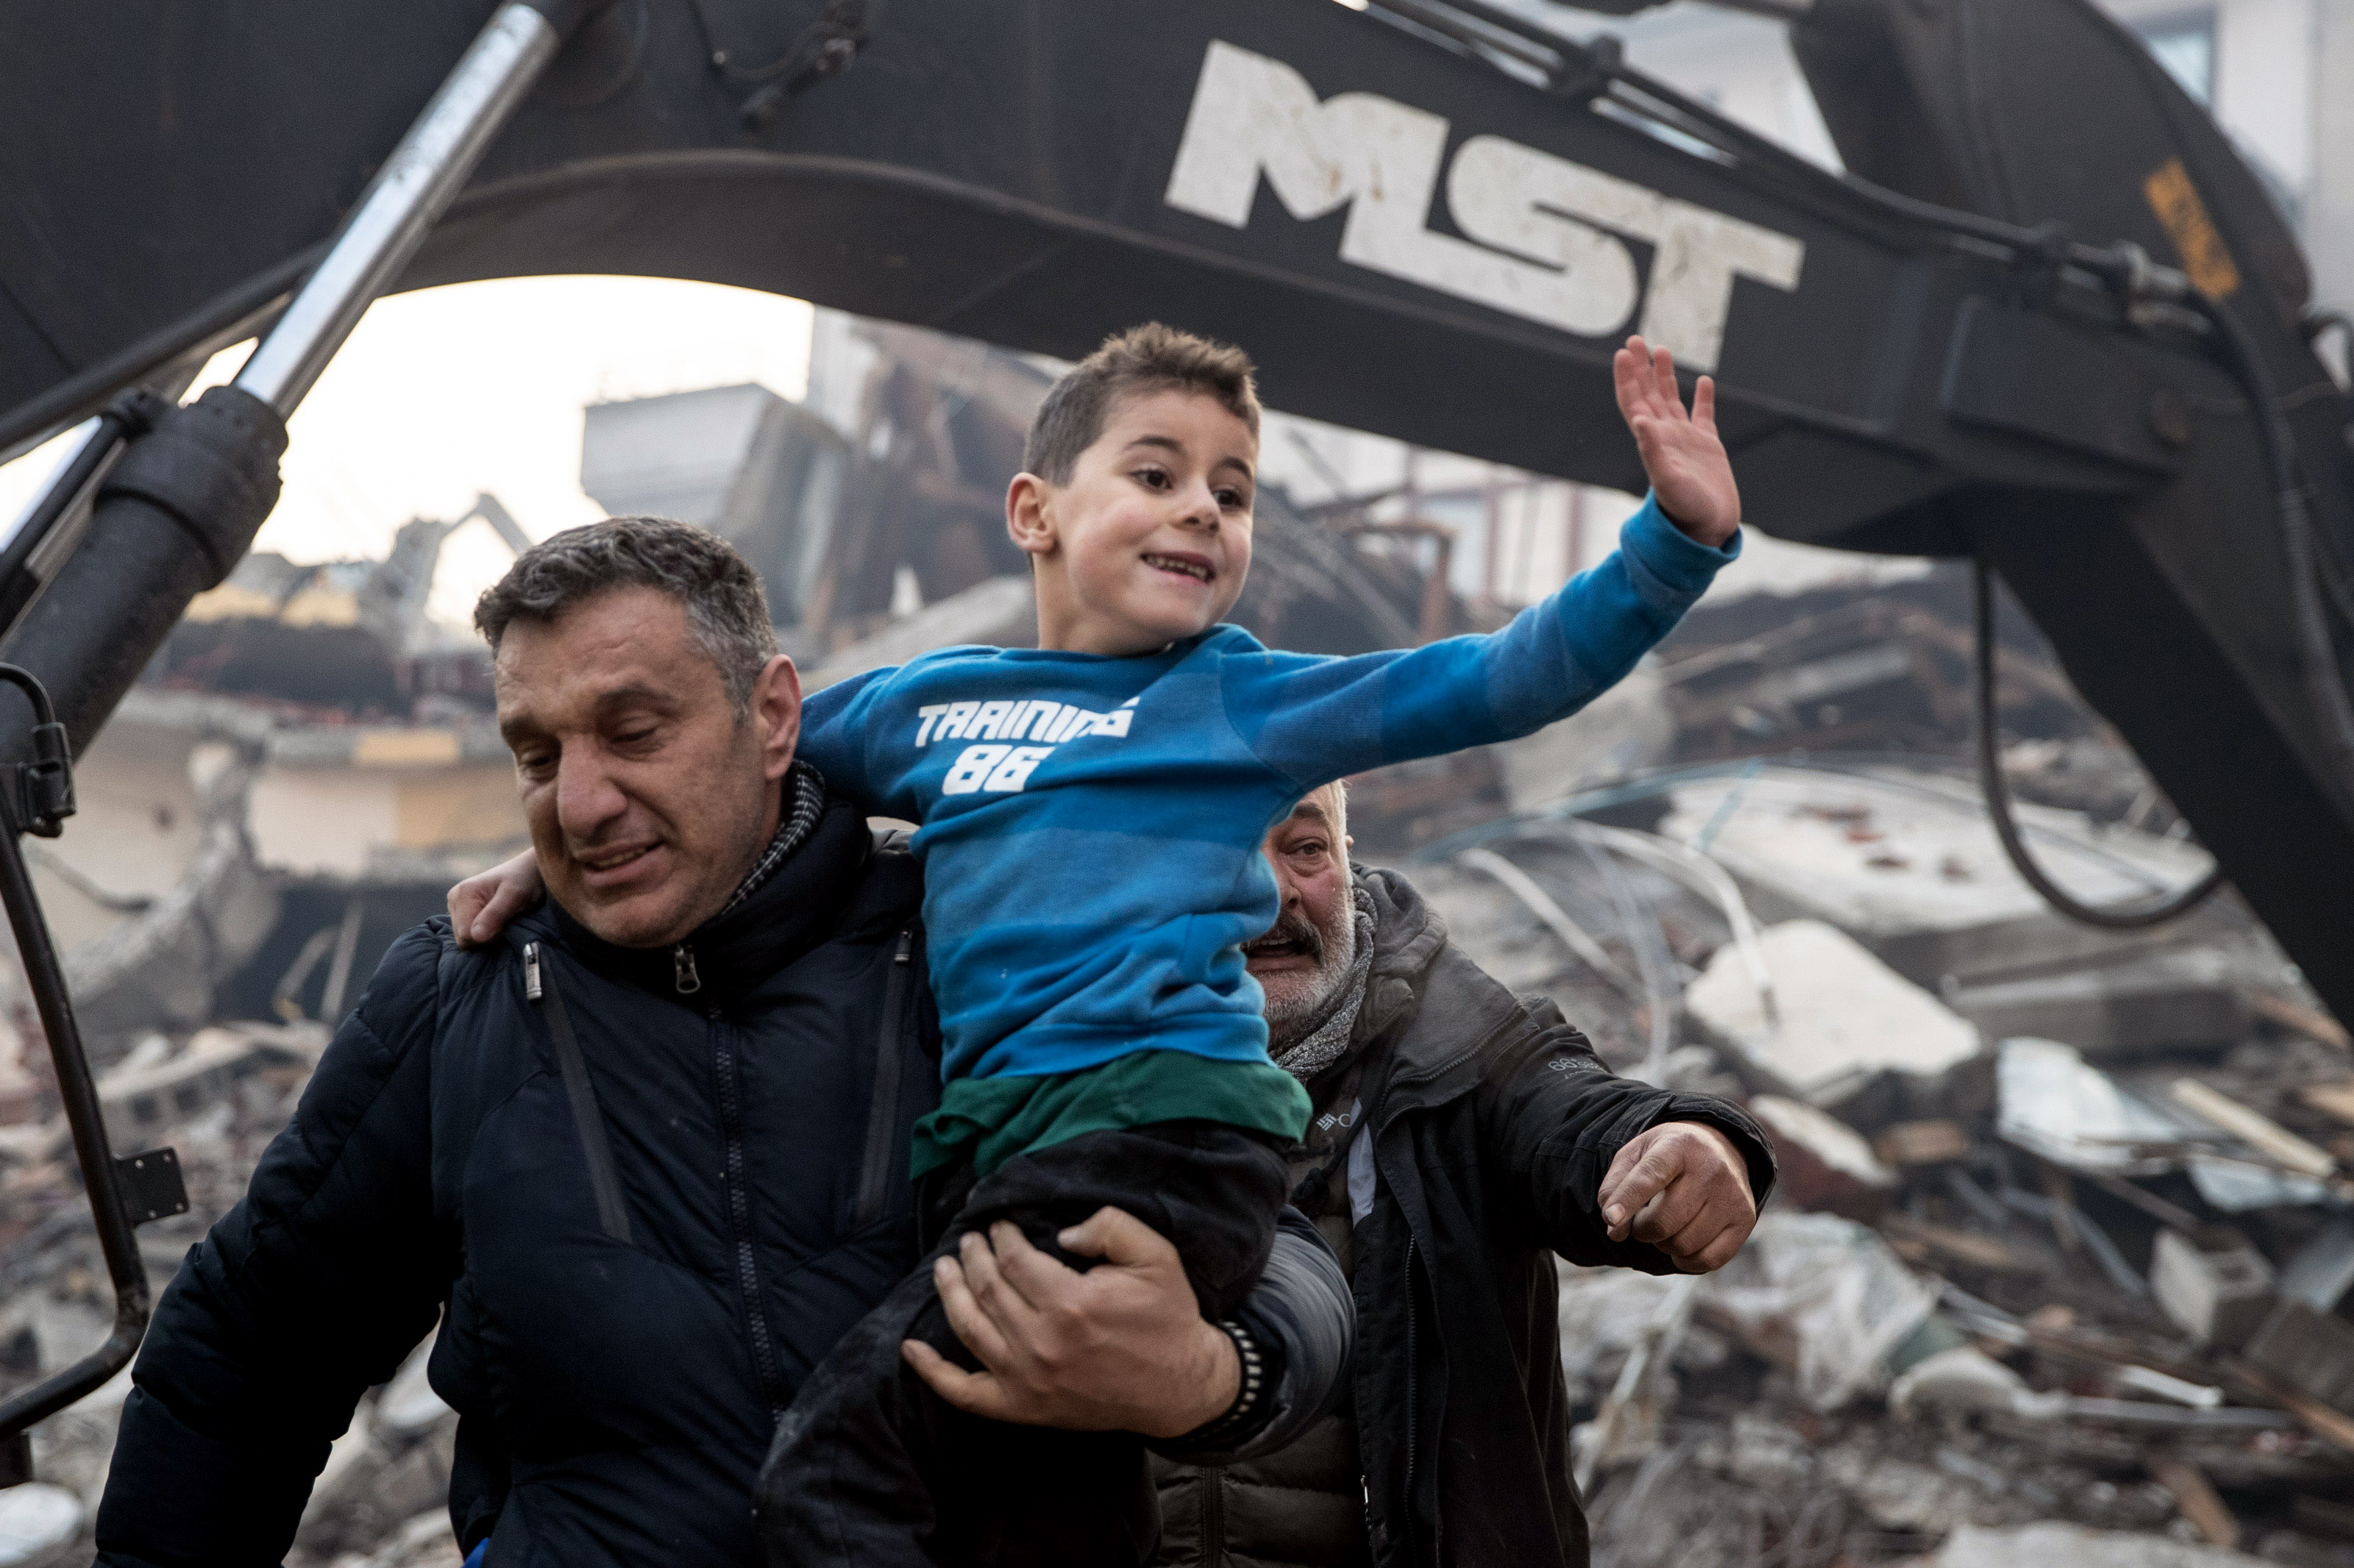 HATAY, TURKEY - FEBRUARY 08: Rescue workers carry 8-year-old survivor Yigit at the site of a collapsed building 52 hours after an earthquake struck on February 08, 2023 in Hatay, Turkey. A 7.8-magnitude earthquake hit near Gaziantep, Turkey early Monday, followed by another 7.5-magnitude tremor just after midday. The quakes caused widespread destruction in southern Turkey and northern Syria and were felt in nearby countries. (Photo by Burak Kara/Getty Images)